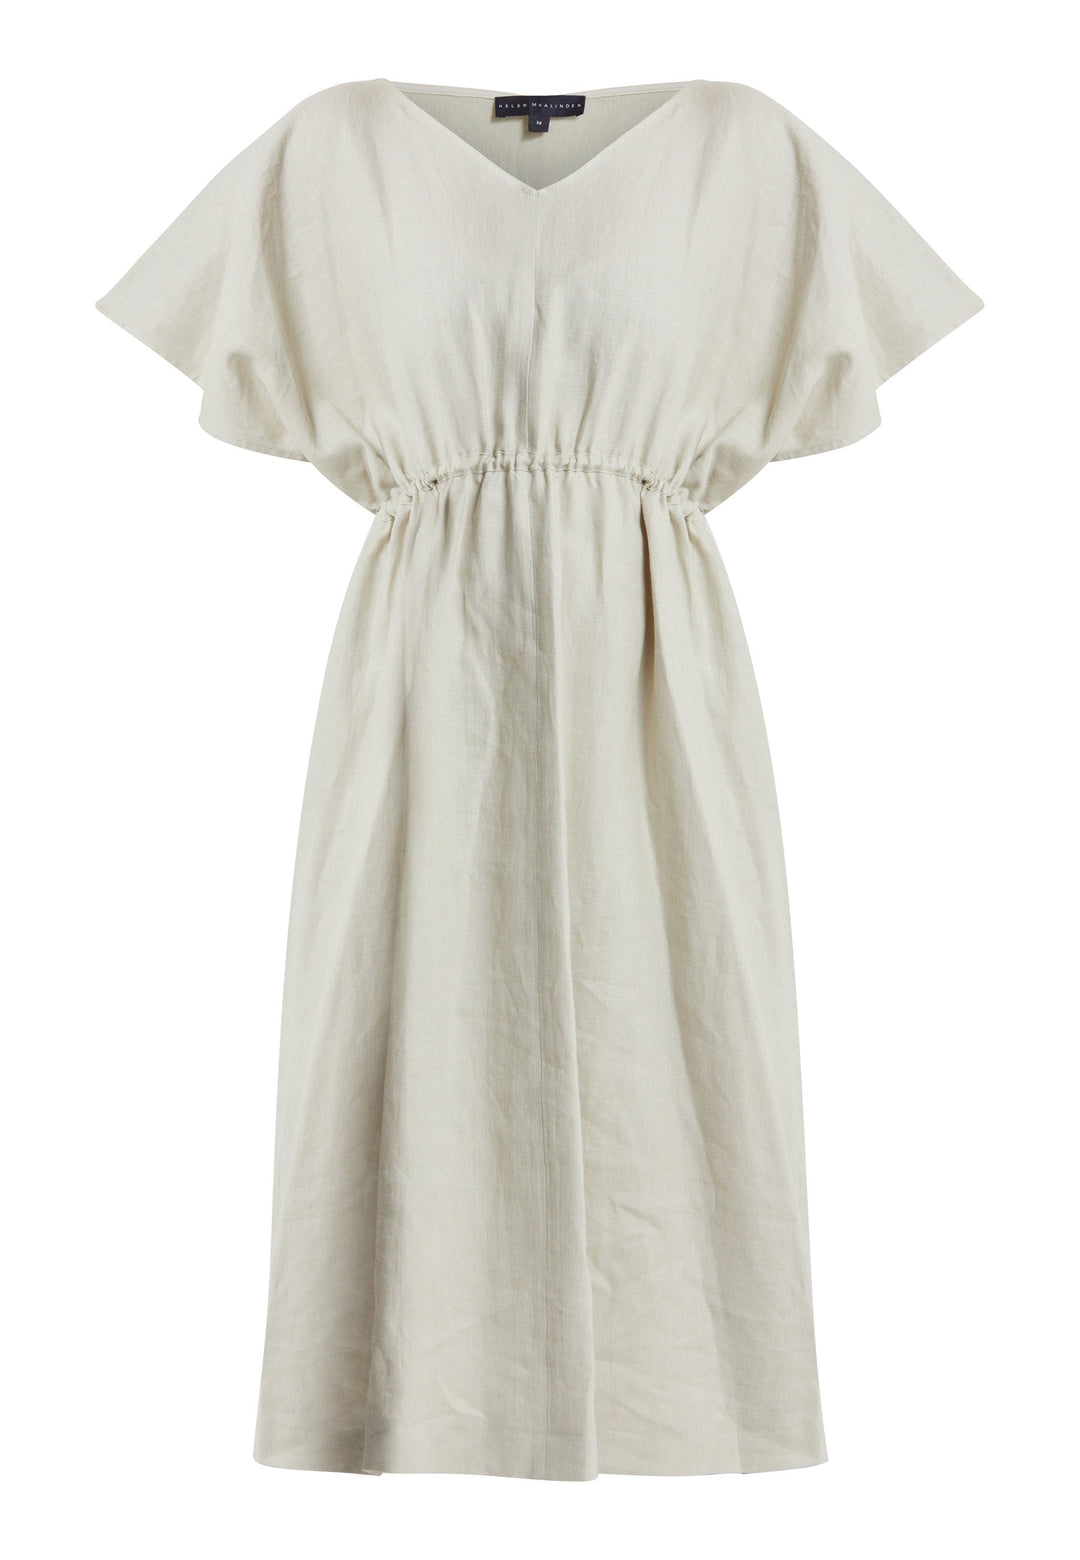 Kelani Oatmeal Kafan is designed with your summer vacation in mind. A loose-fitting pull-on dress with a V-neckline that embraces laid-back spirit. Cut from a sustainably sourced breathable Irish linen. A piece you can't travel without. This versatile style is designed to be worn in three different ways. Engineered with a channel and belt at the midriff that can be ruched and left loose, waisted and tied at the back or front. Ideal for a day at the beach followed by dinner at the pier.